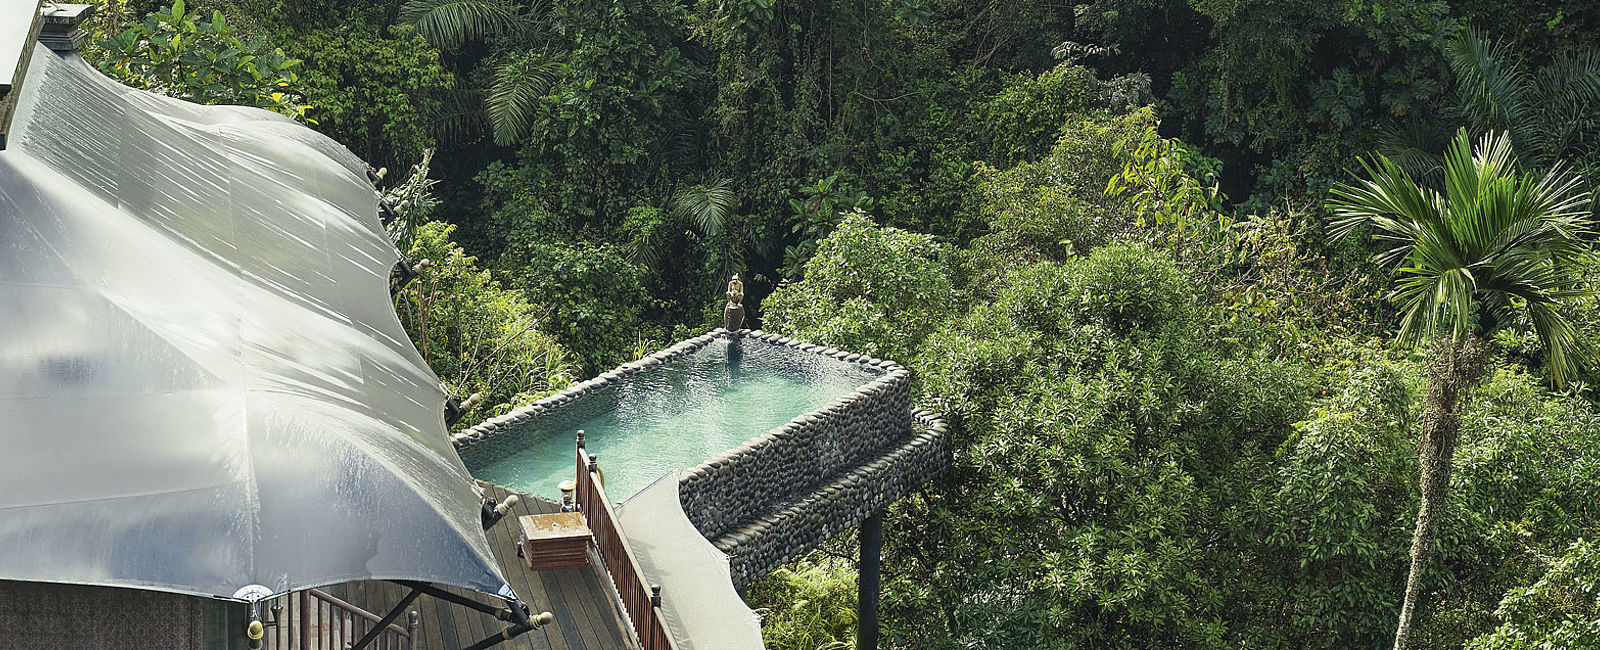 HOTEL TIPPS
 Capella Ubud, Bali 
 Glamping deluxe 